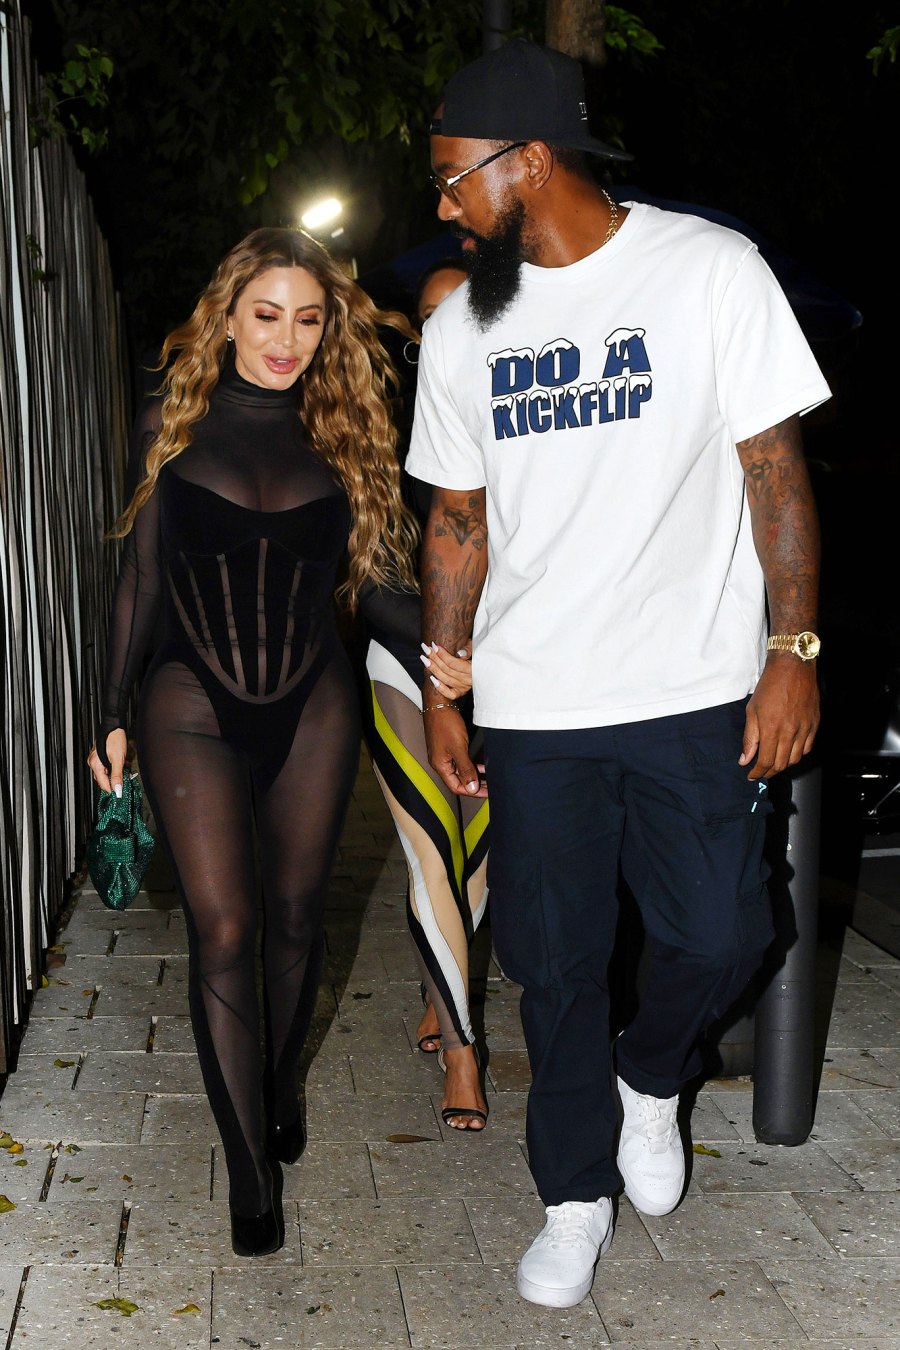 Why the Age Gap Doesn't Matter Everything Larsa Pippen Has Said About Her Romance With Marcus Jordan